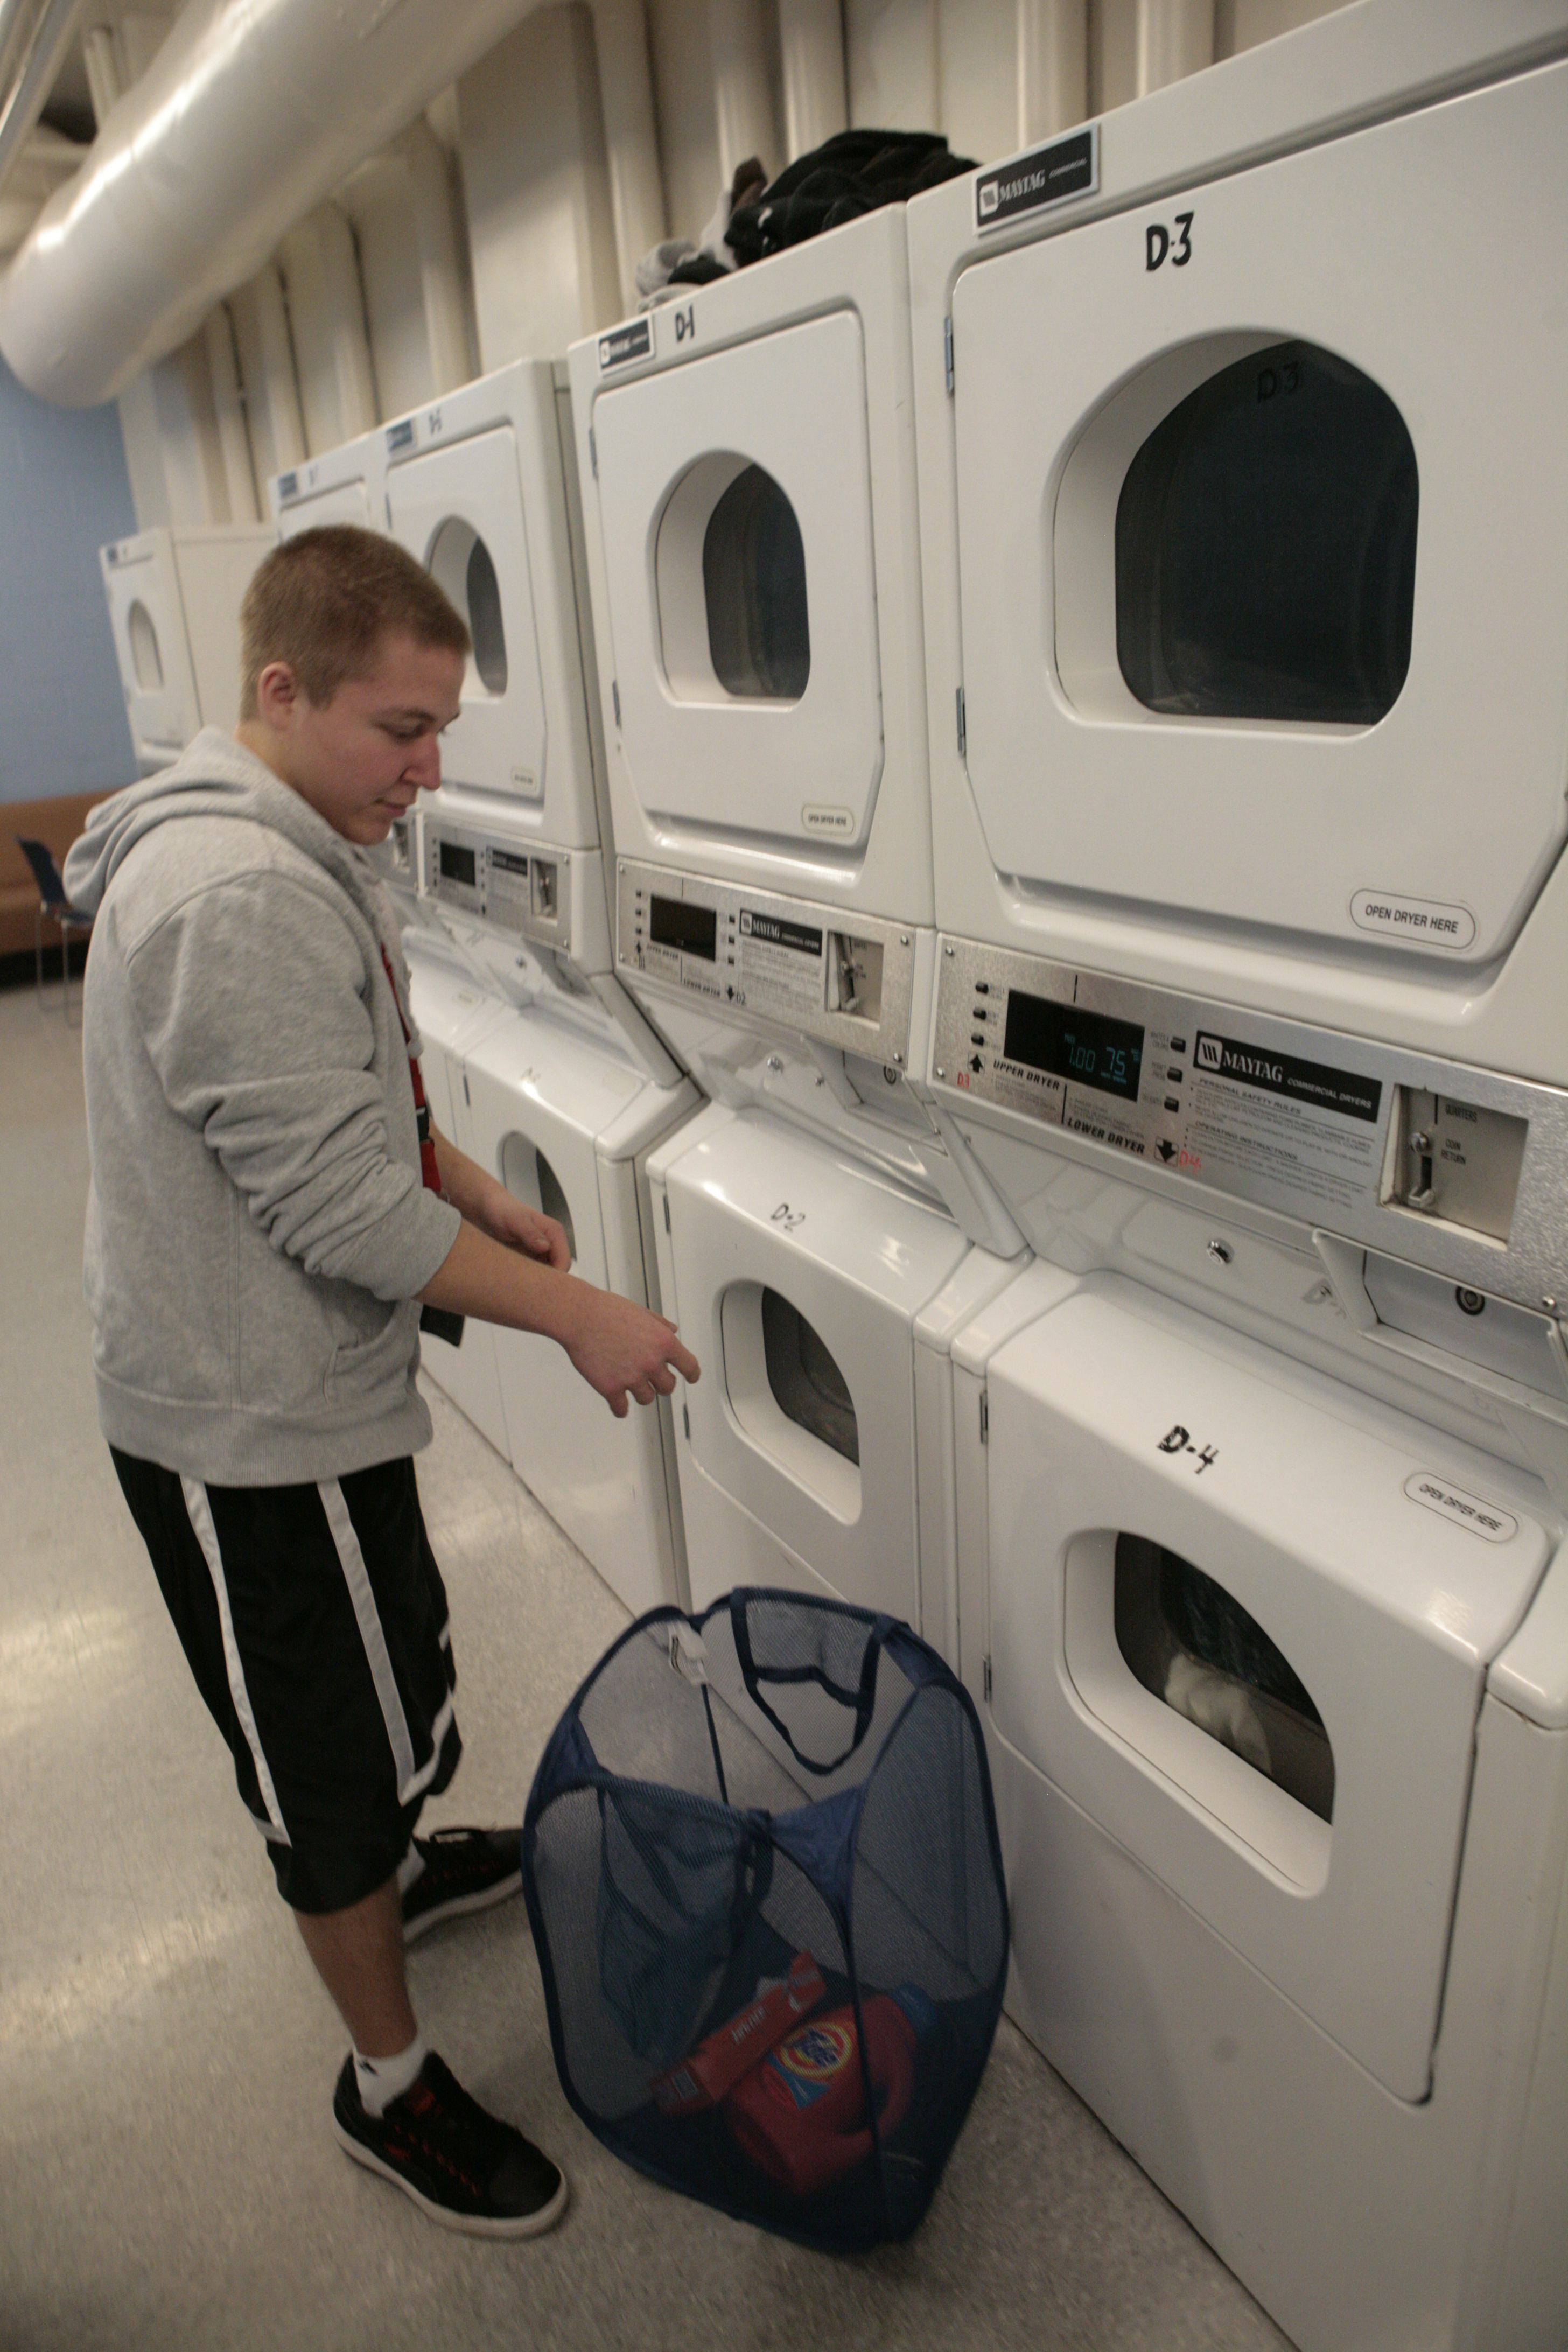 A student is putting laundry into a washing machine